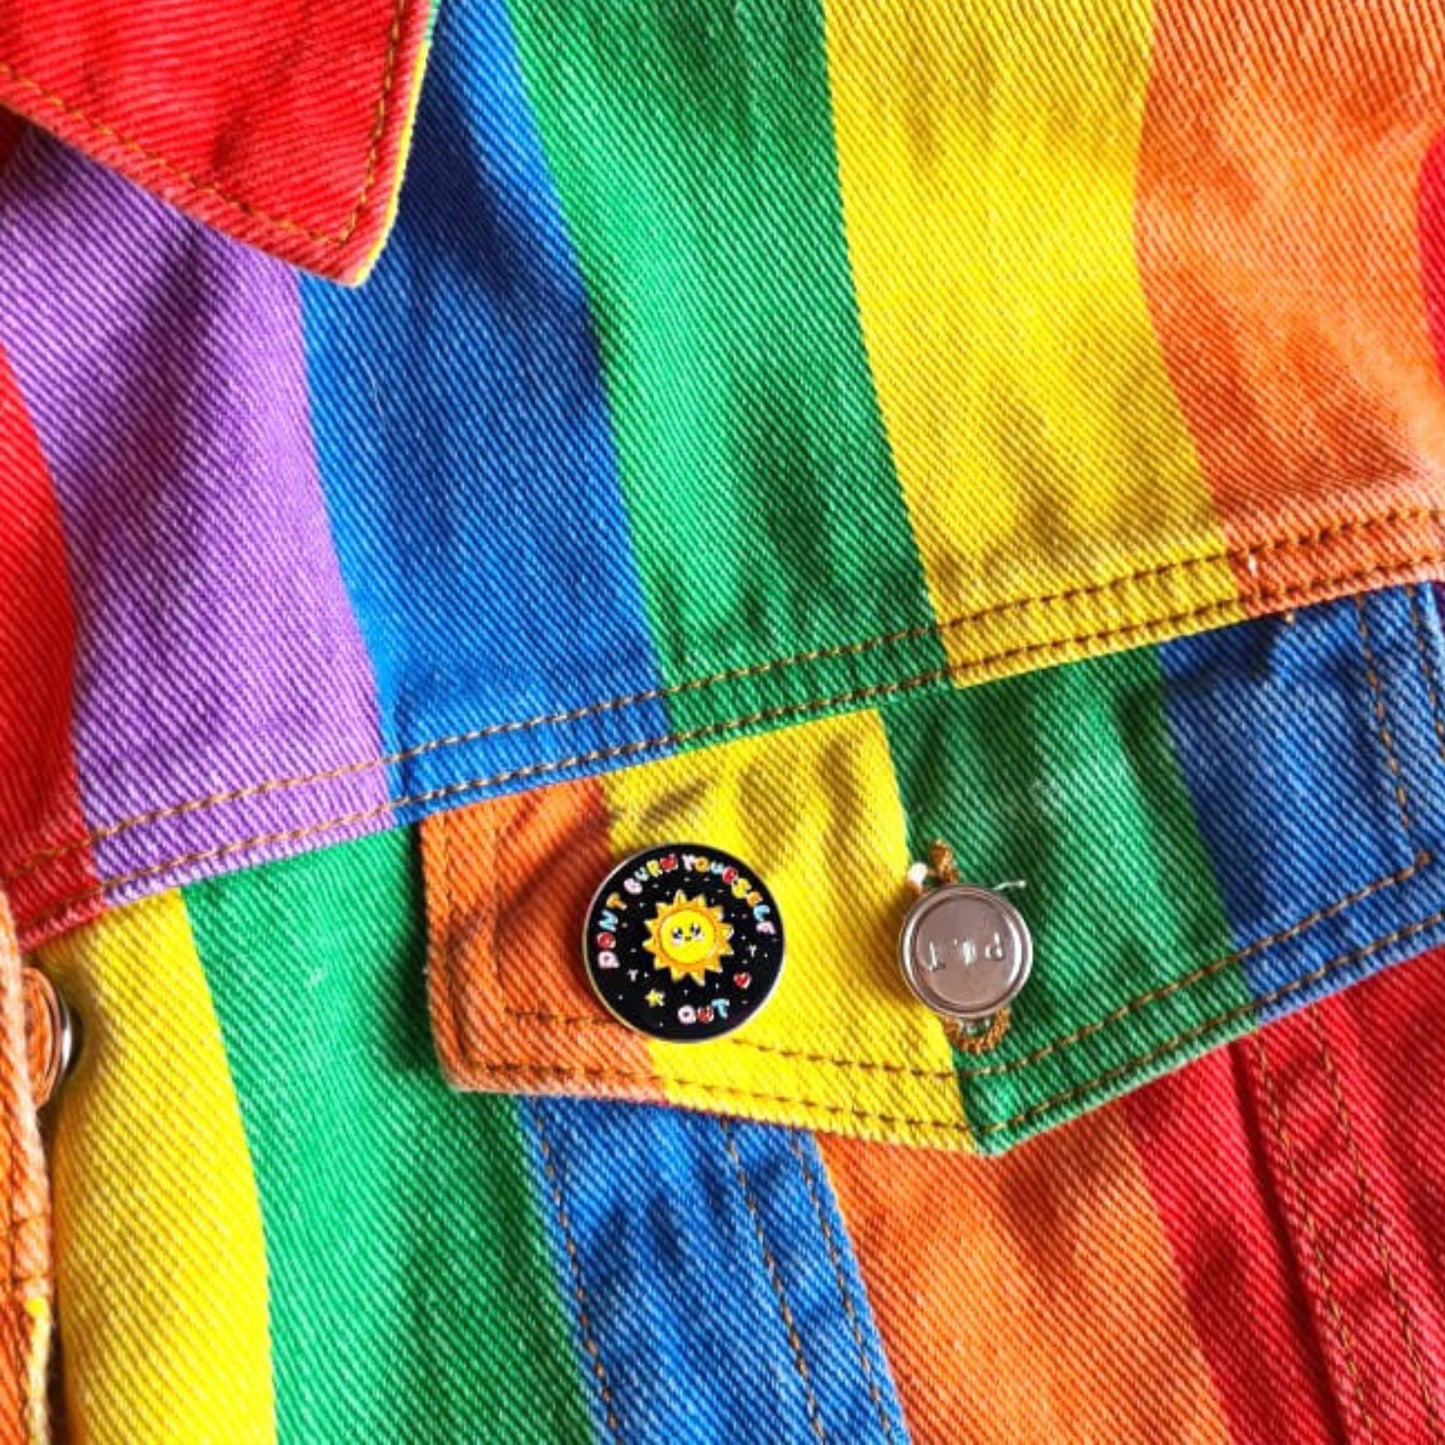 The Don't Burn Yourself Out Sunshine Enamel Pin pinned on a pocket of a rainbow denim jacket. The circle shaped pin badge is a black base with a yellow smiling sunshine in the centre with rainbow text surrounding it reading 'don't burn yourself out' along with a red heart, yellow star and silver sparkles. The design was created as a gentle reminder to practise self care.